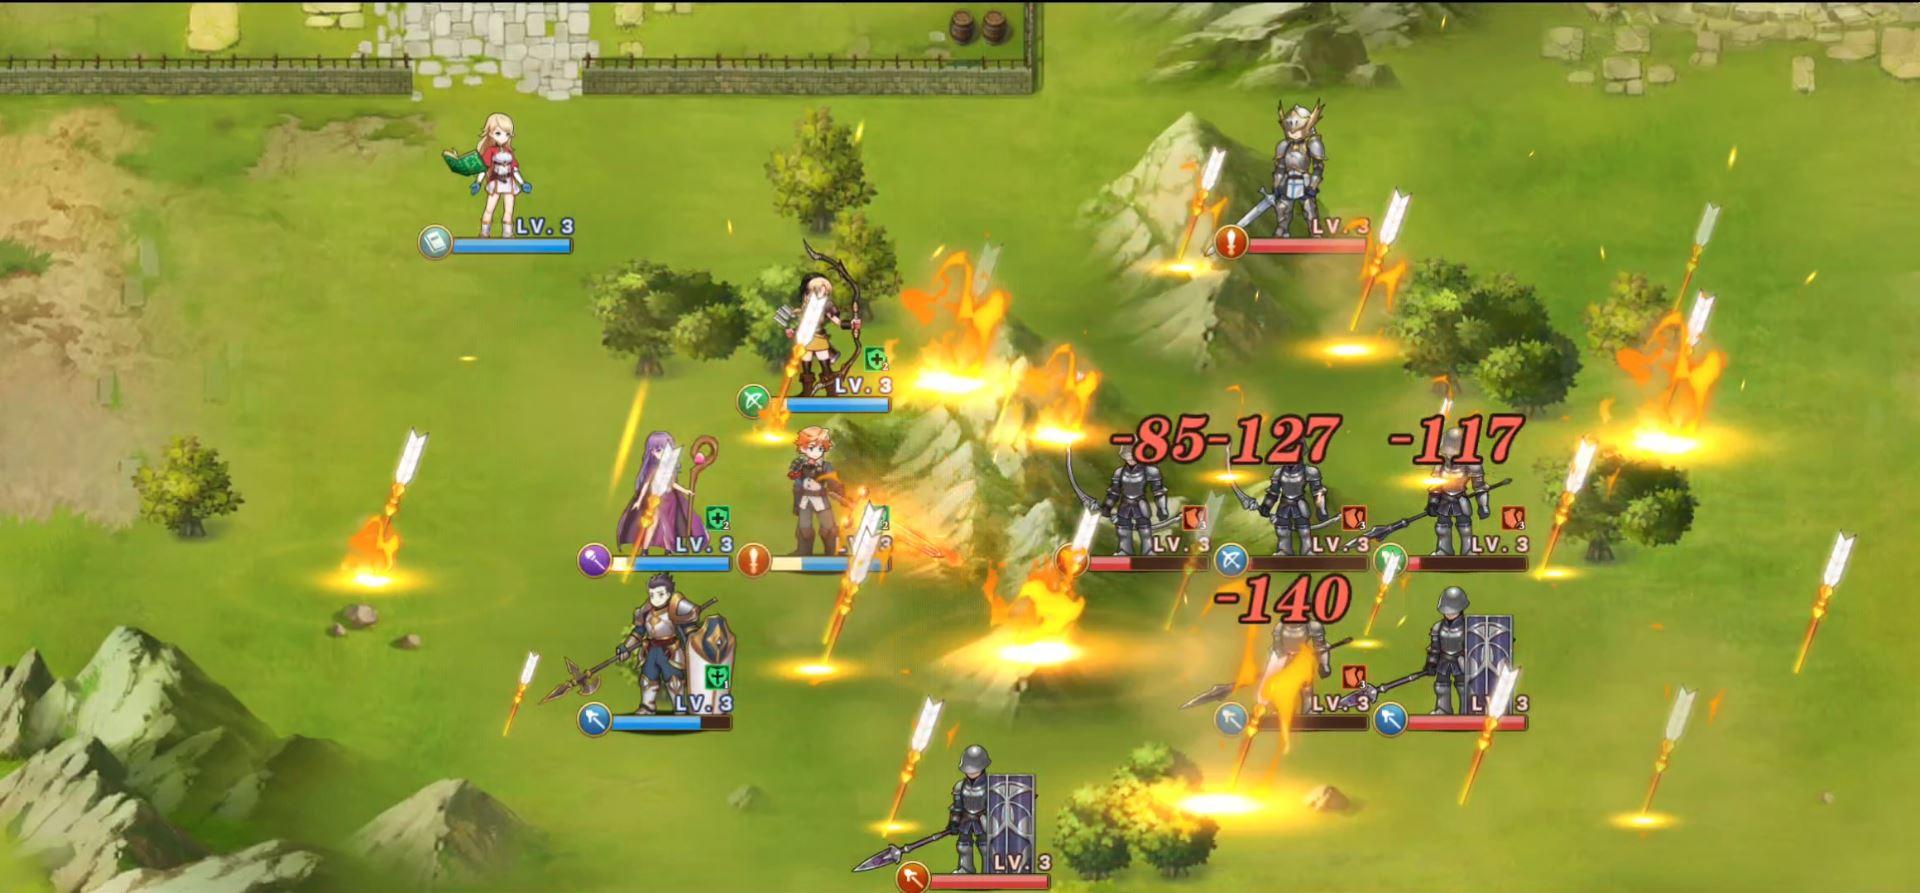 A tactical-role playing game that is quite good, nice to play - Fate  Fantasy:Strategy RPG - TapTap